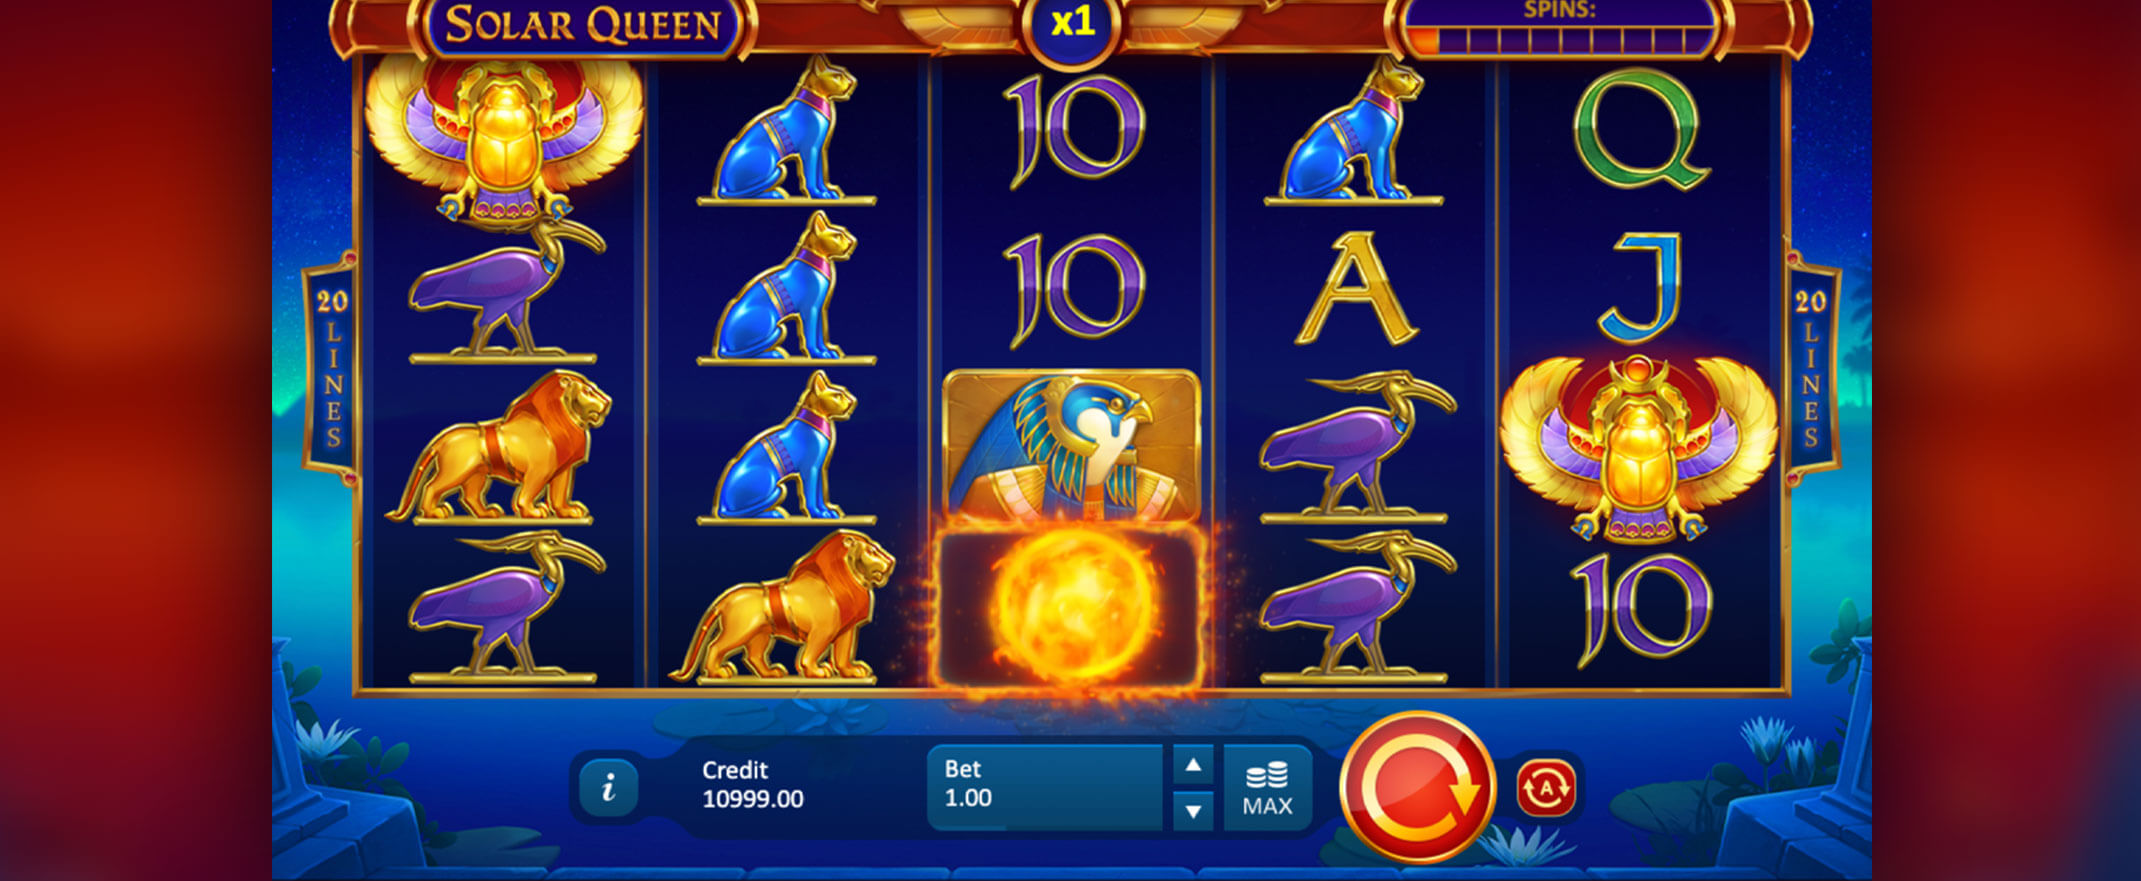 Solar Queen slot by playson